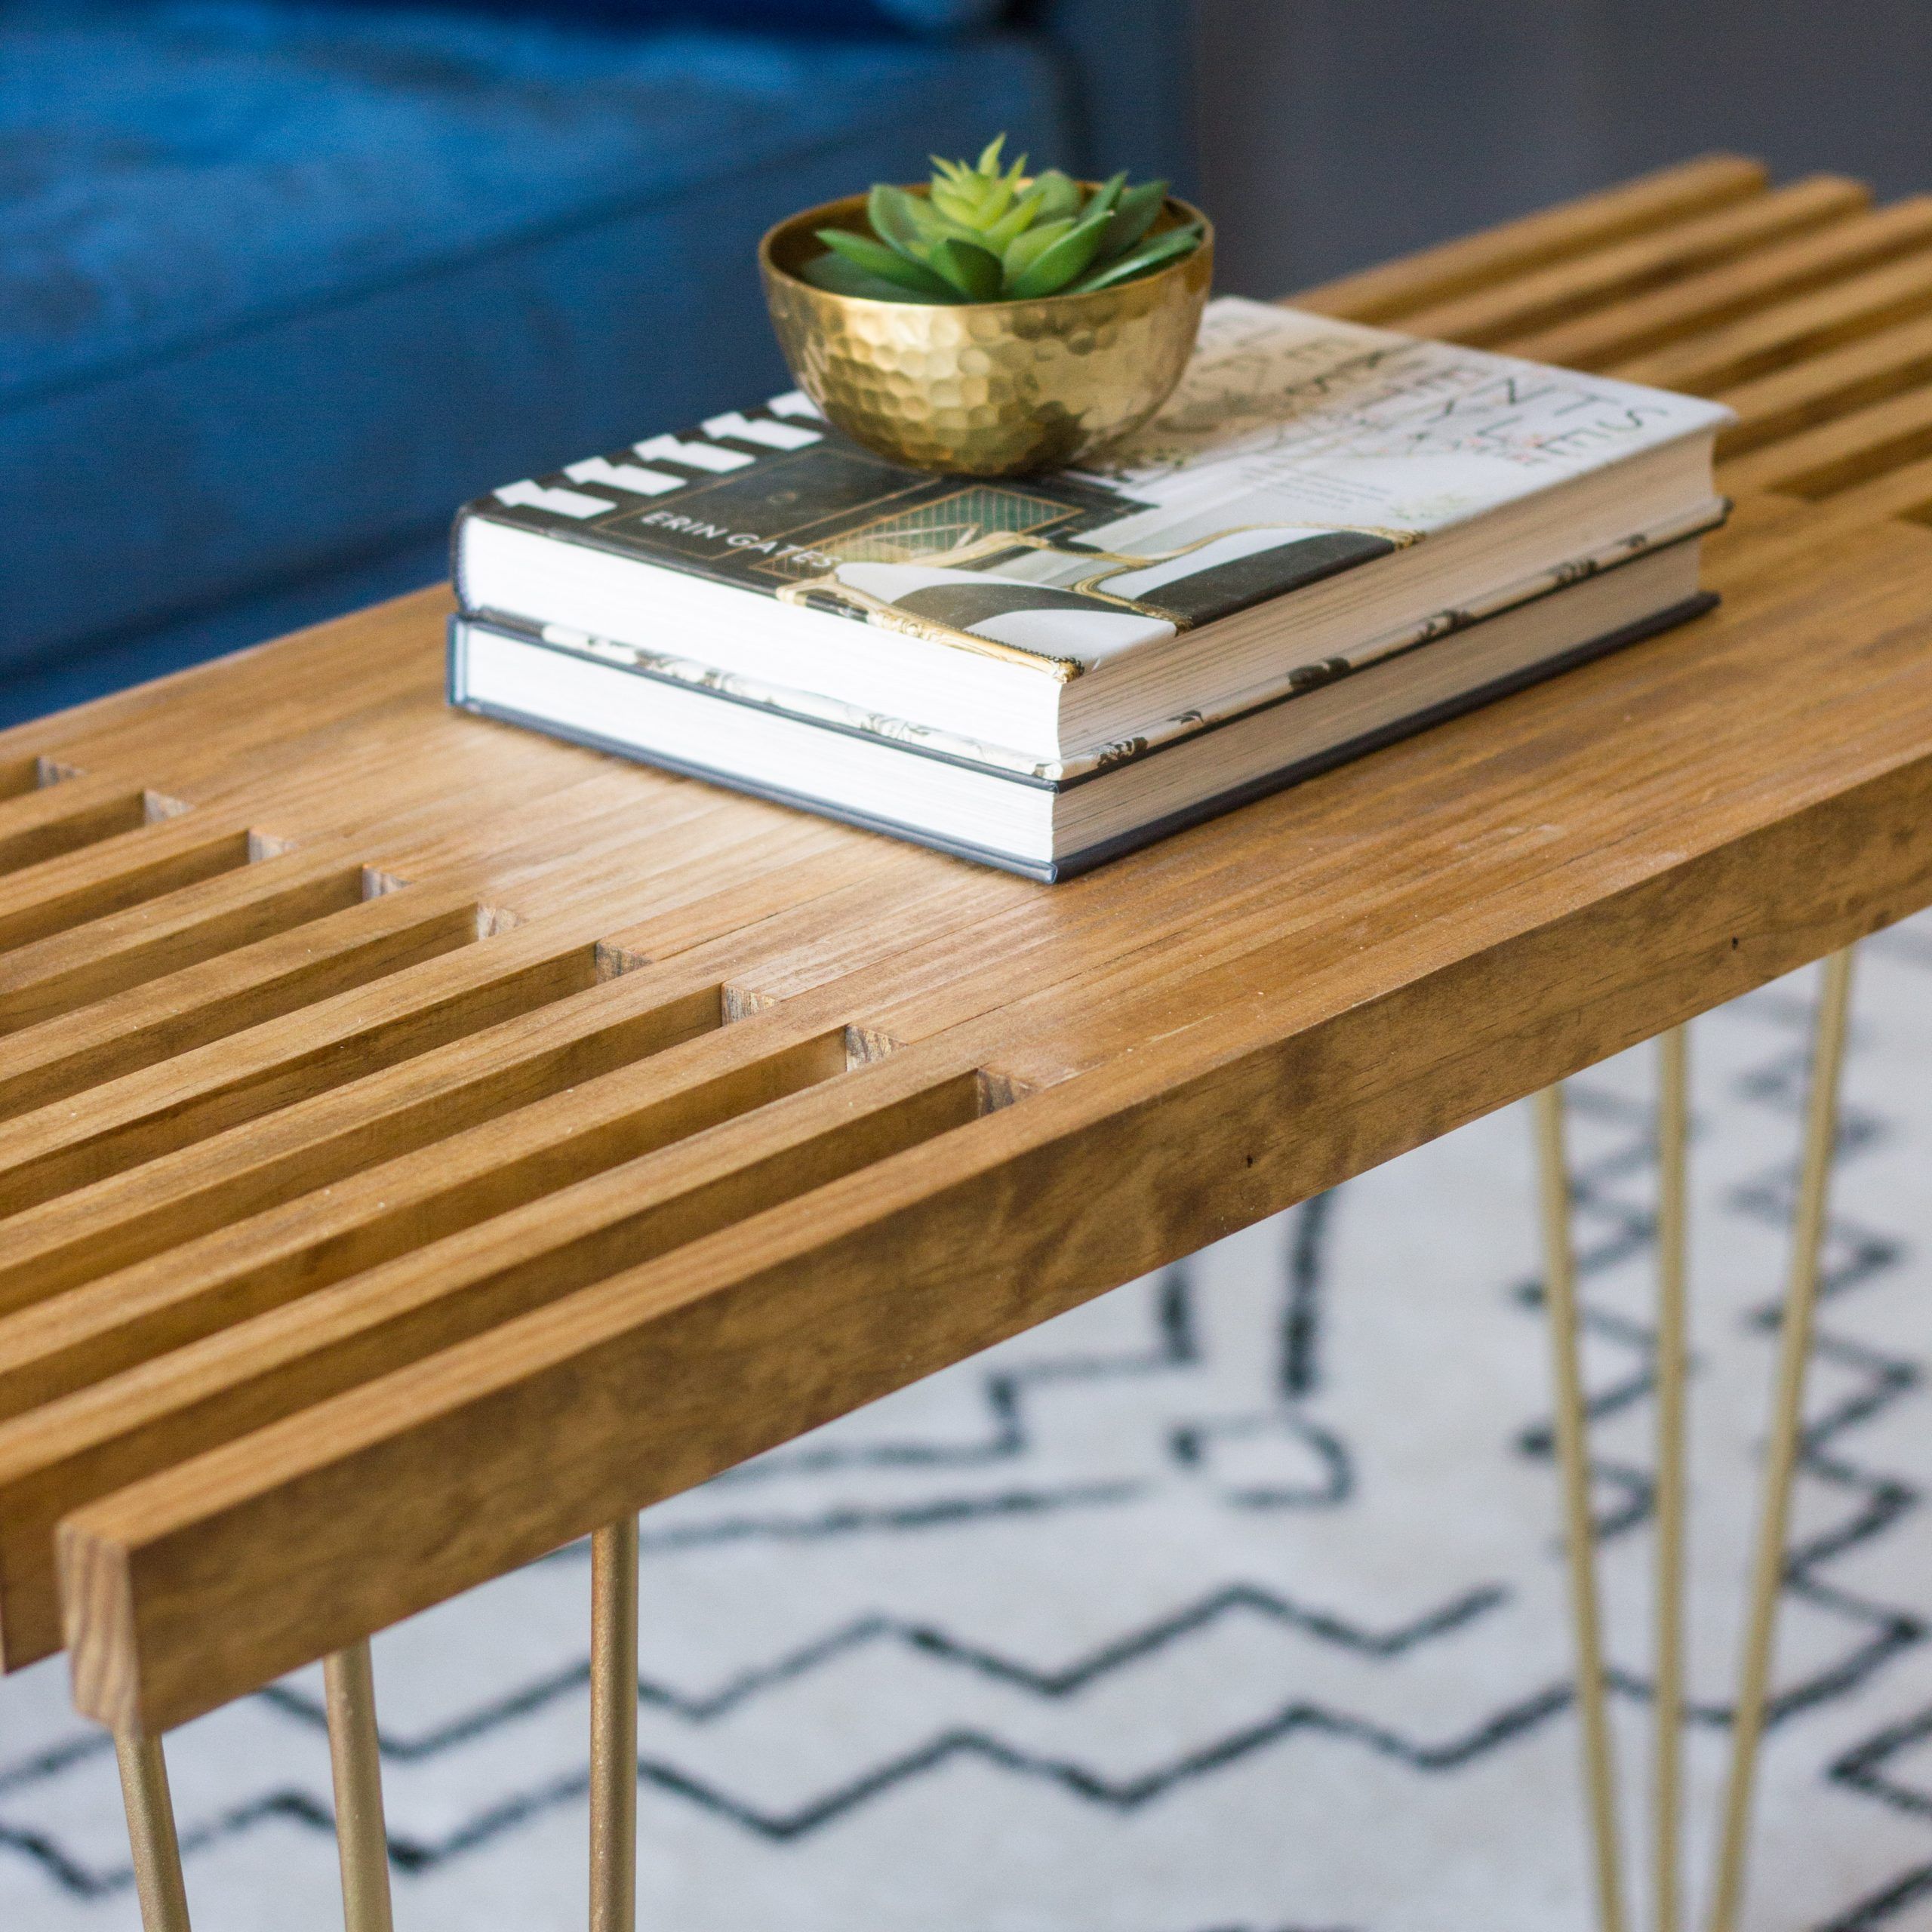 Diy Slatted Coffee Table With Hairpin Legs – Erin Spain For Slat Coffee Tables (View 3 of 20)